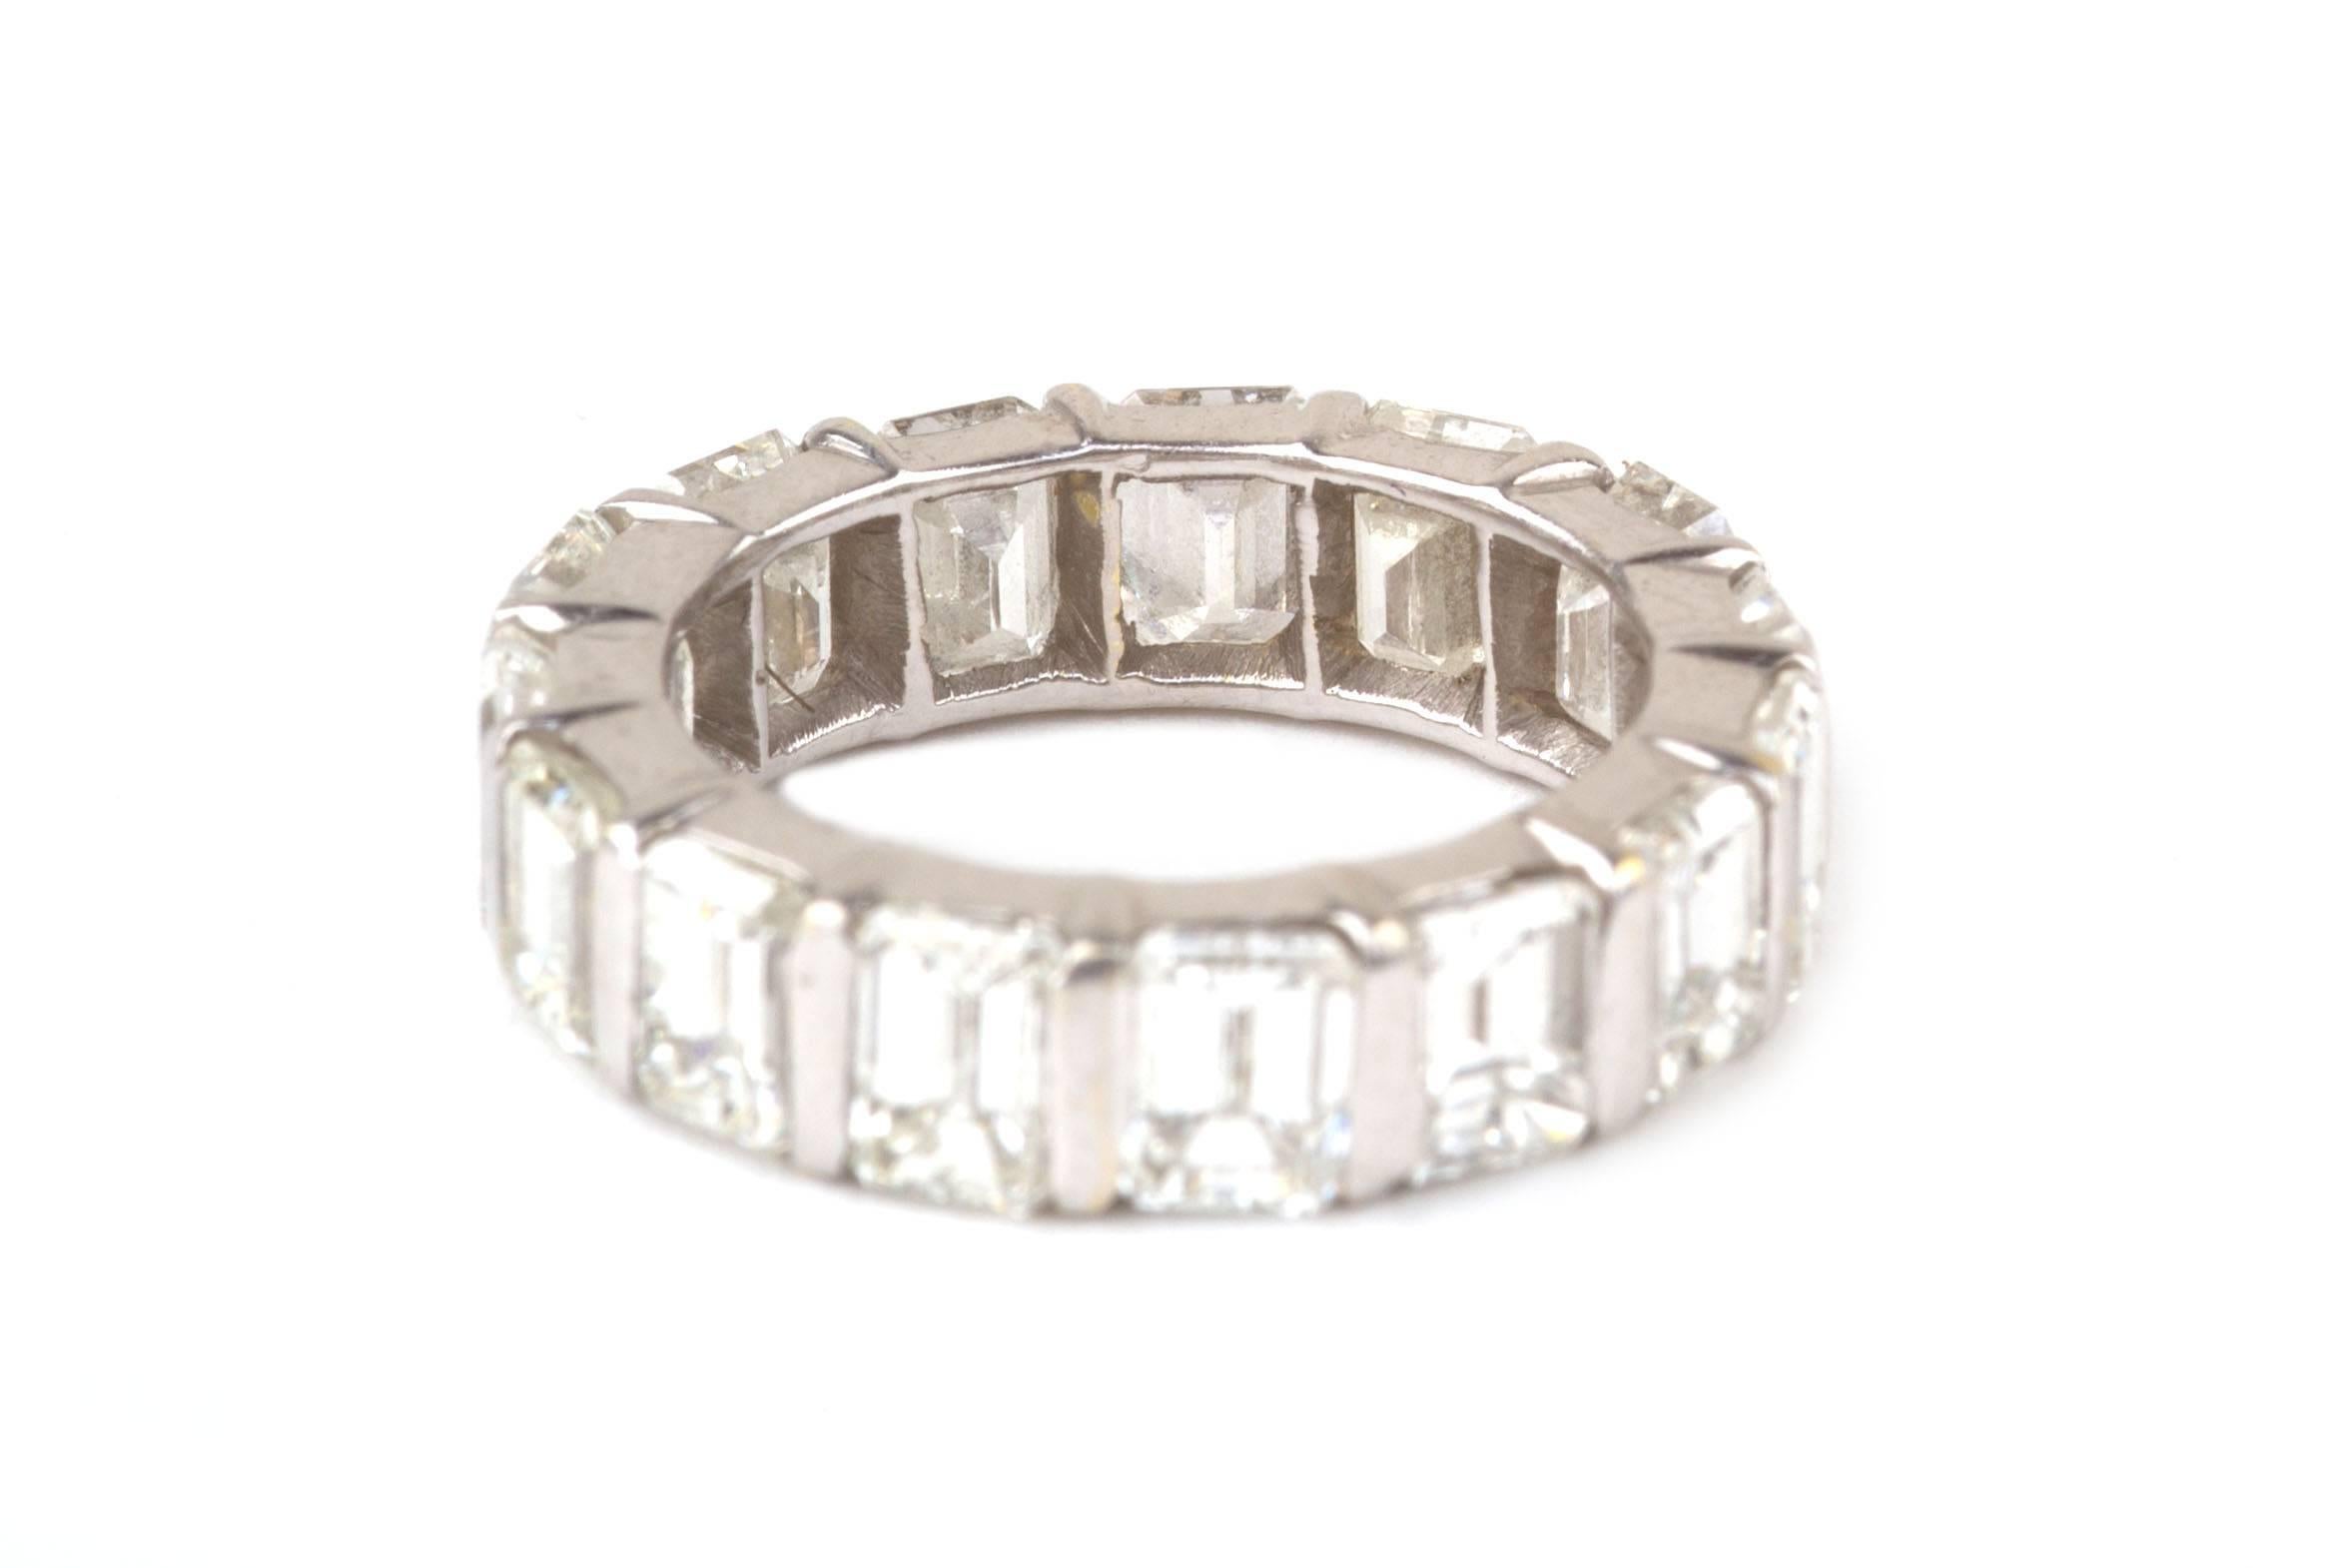 This radiant diamond eternity band features 15 emerald cut diamonds in a channel prong setting. The 15 diamonds equal approximately 7 1/2 carat total weight, and measure 12.5-13mm in width.  The diamonds are graded approximately G-H color and VS